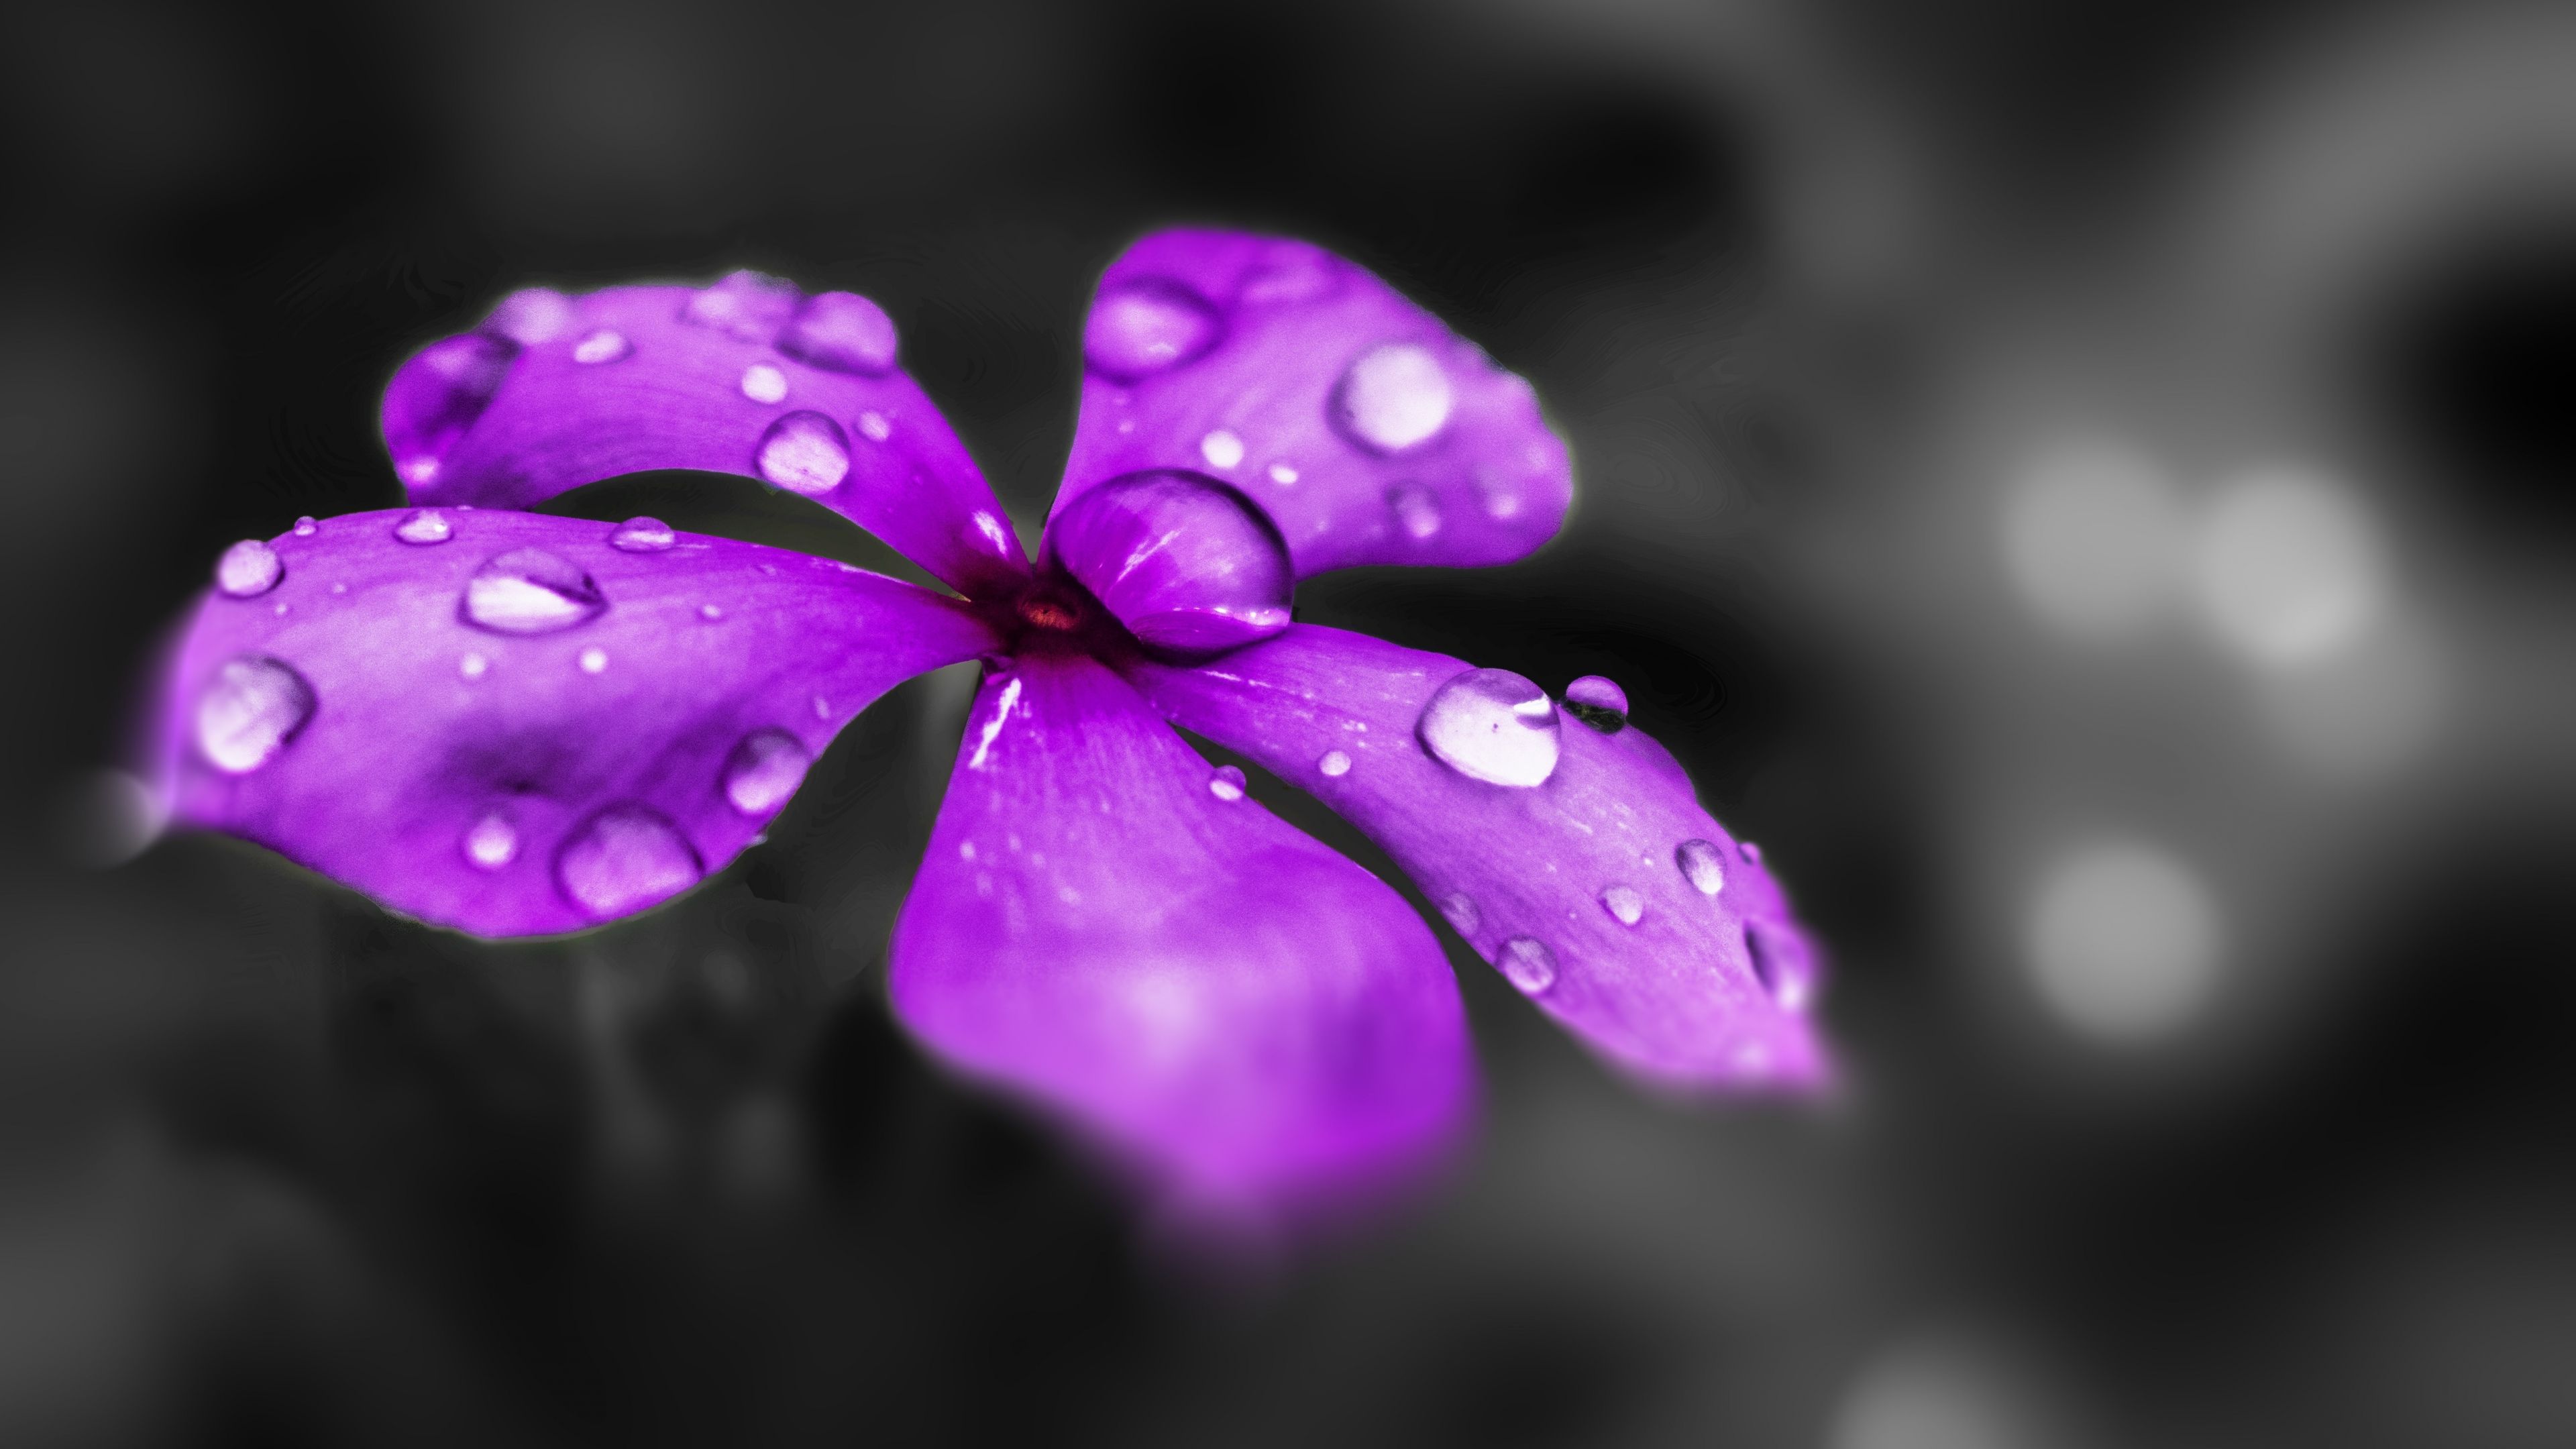 Download 3840x2160 wallpaper water drops, catharanthus roseus, purple flower, blur, close up, 4k, uhd 16: widescreen, 3840x2160 HD image, background, 1400